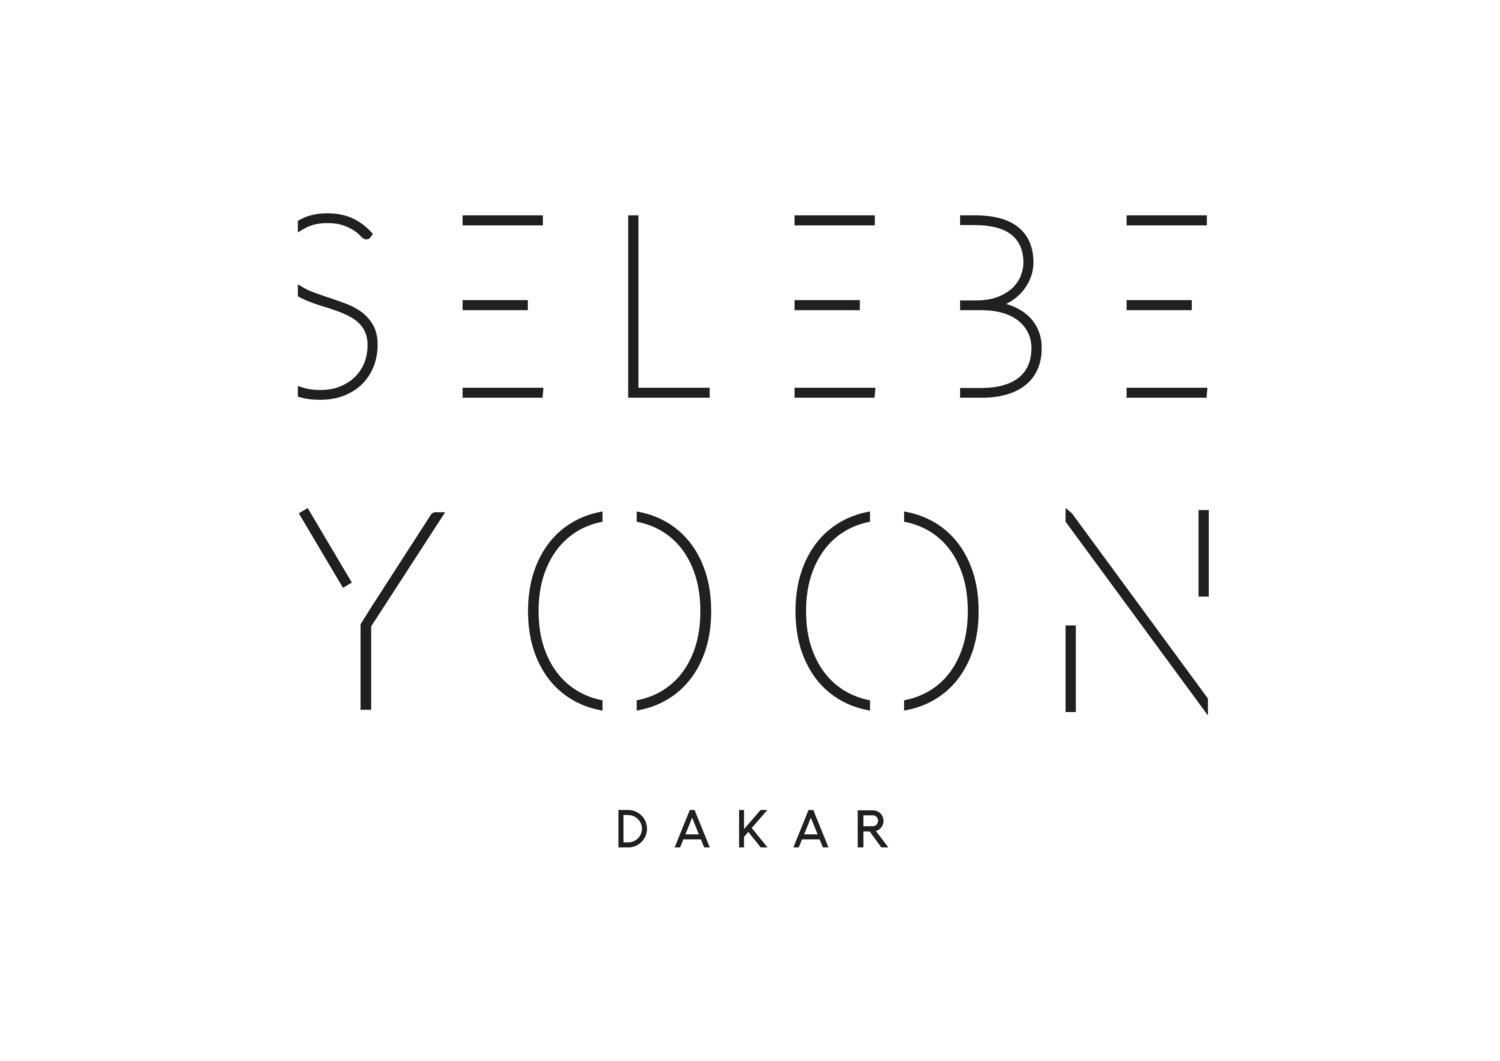 Profile picture of the artspace Selebe Yoon